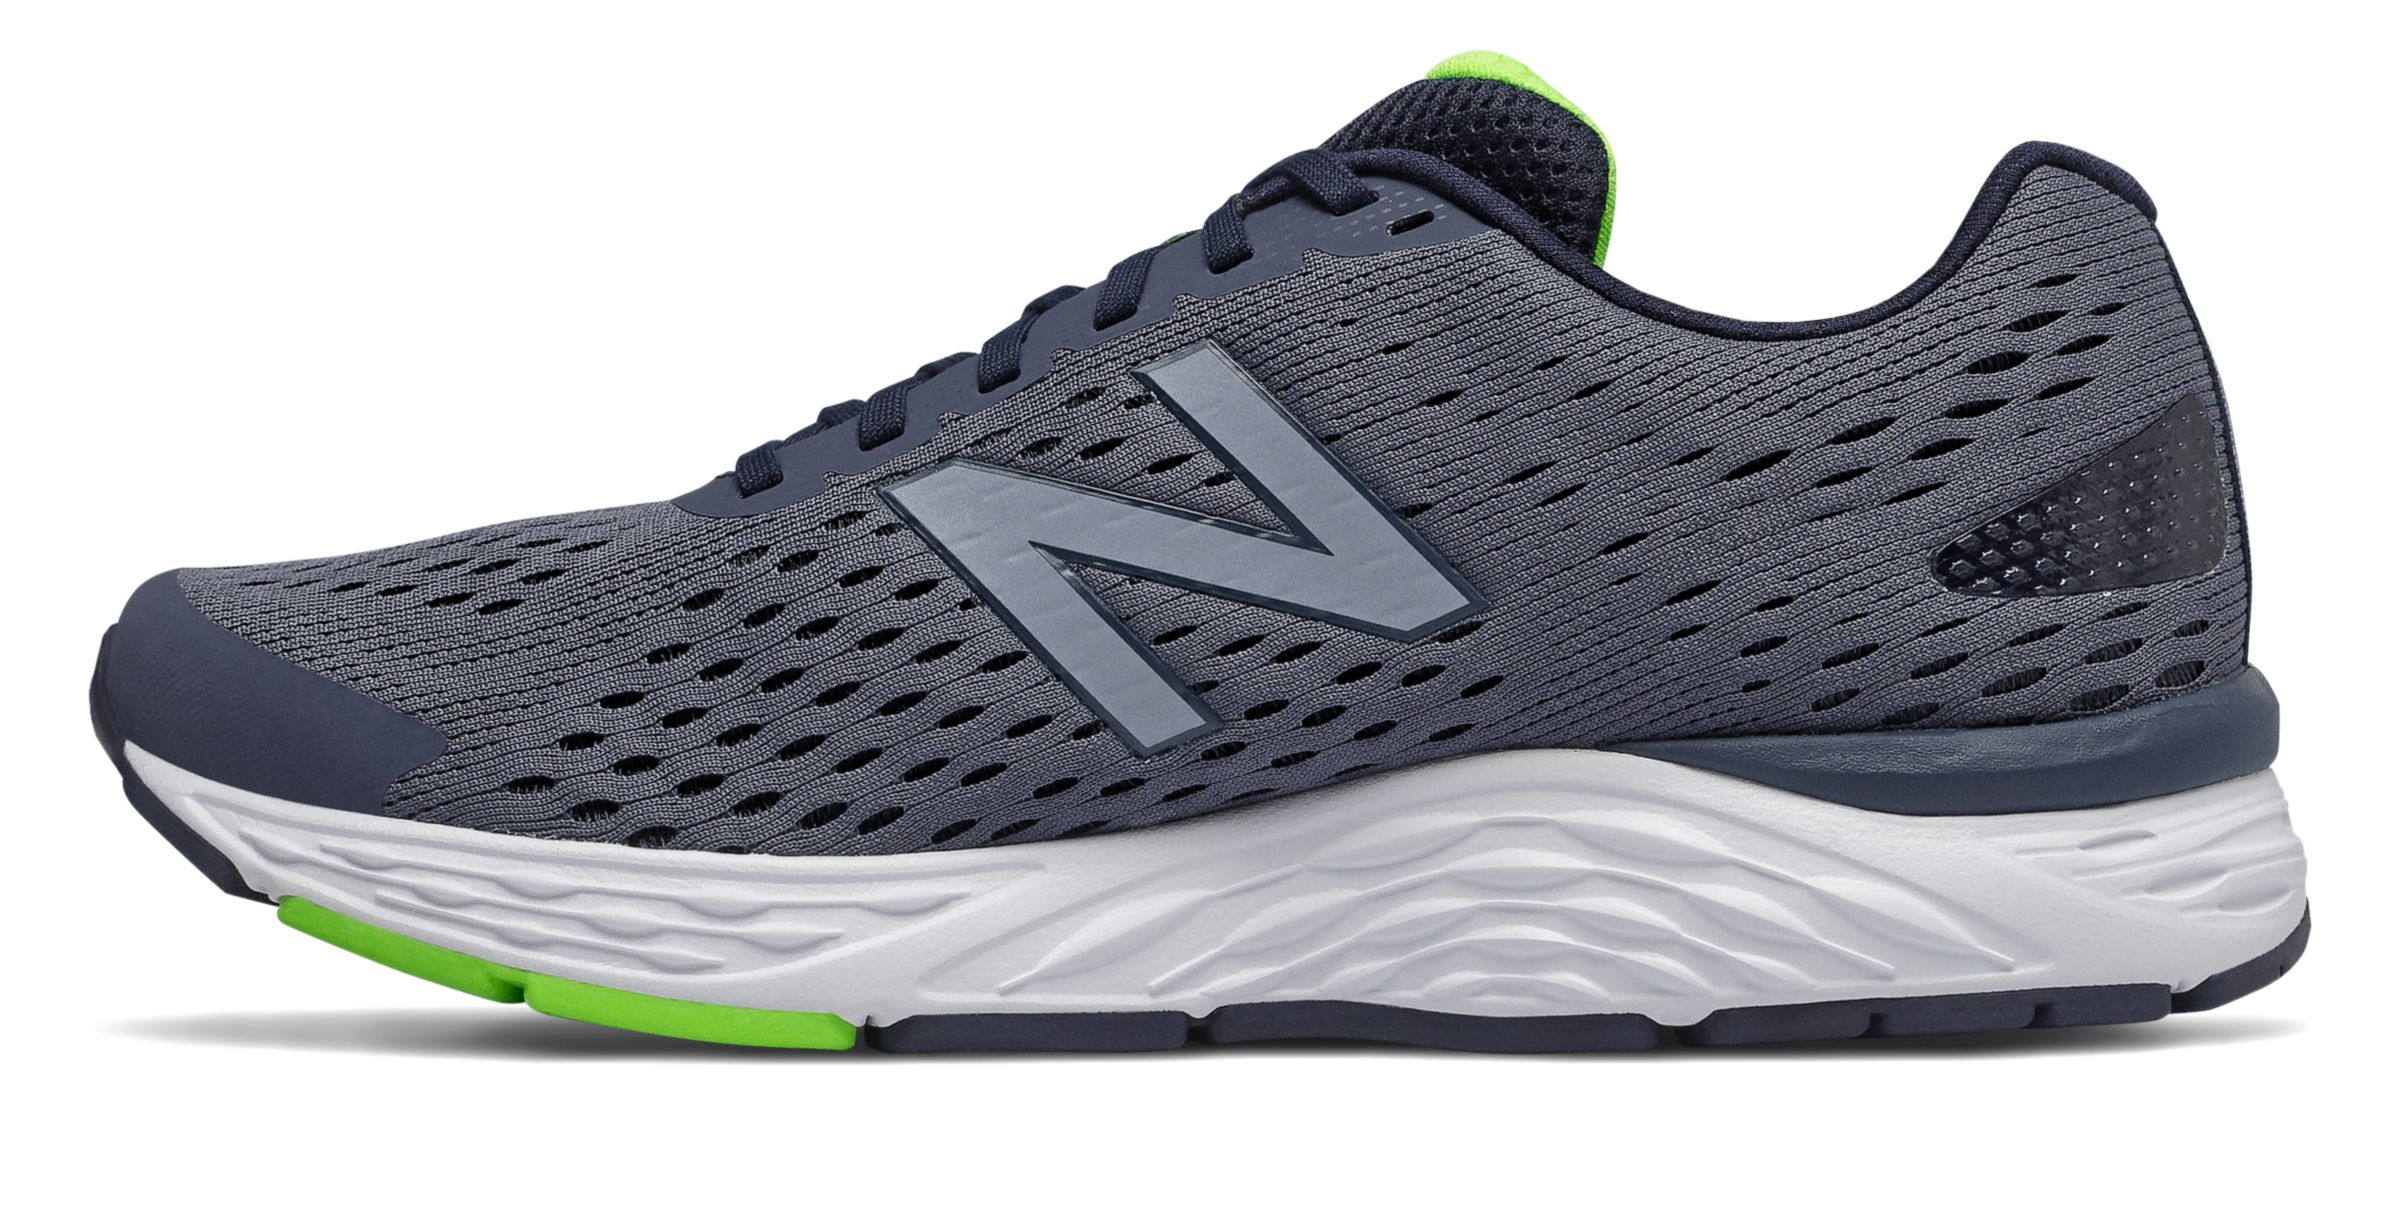 New Balance M680-V6 on Sale - Discounts Up to 20% Off on M680LN6 at Joe's  New Balance Outlet